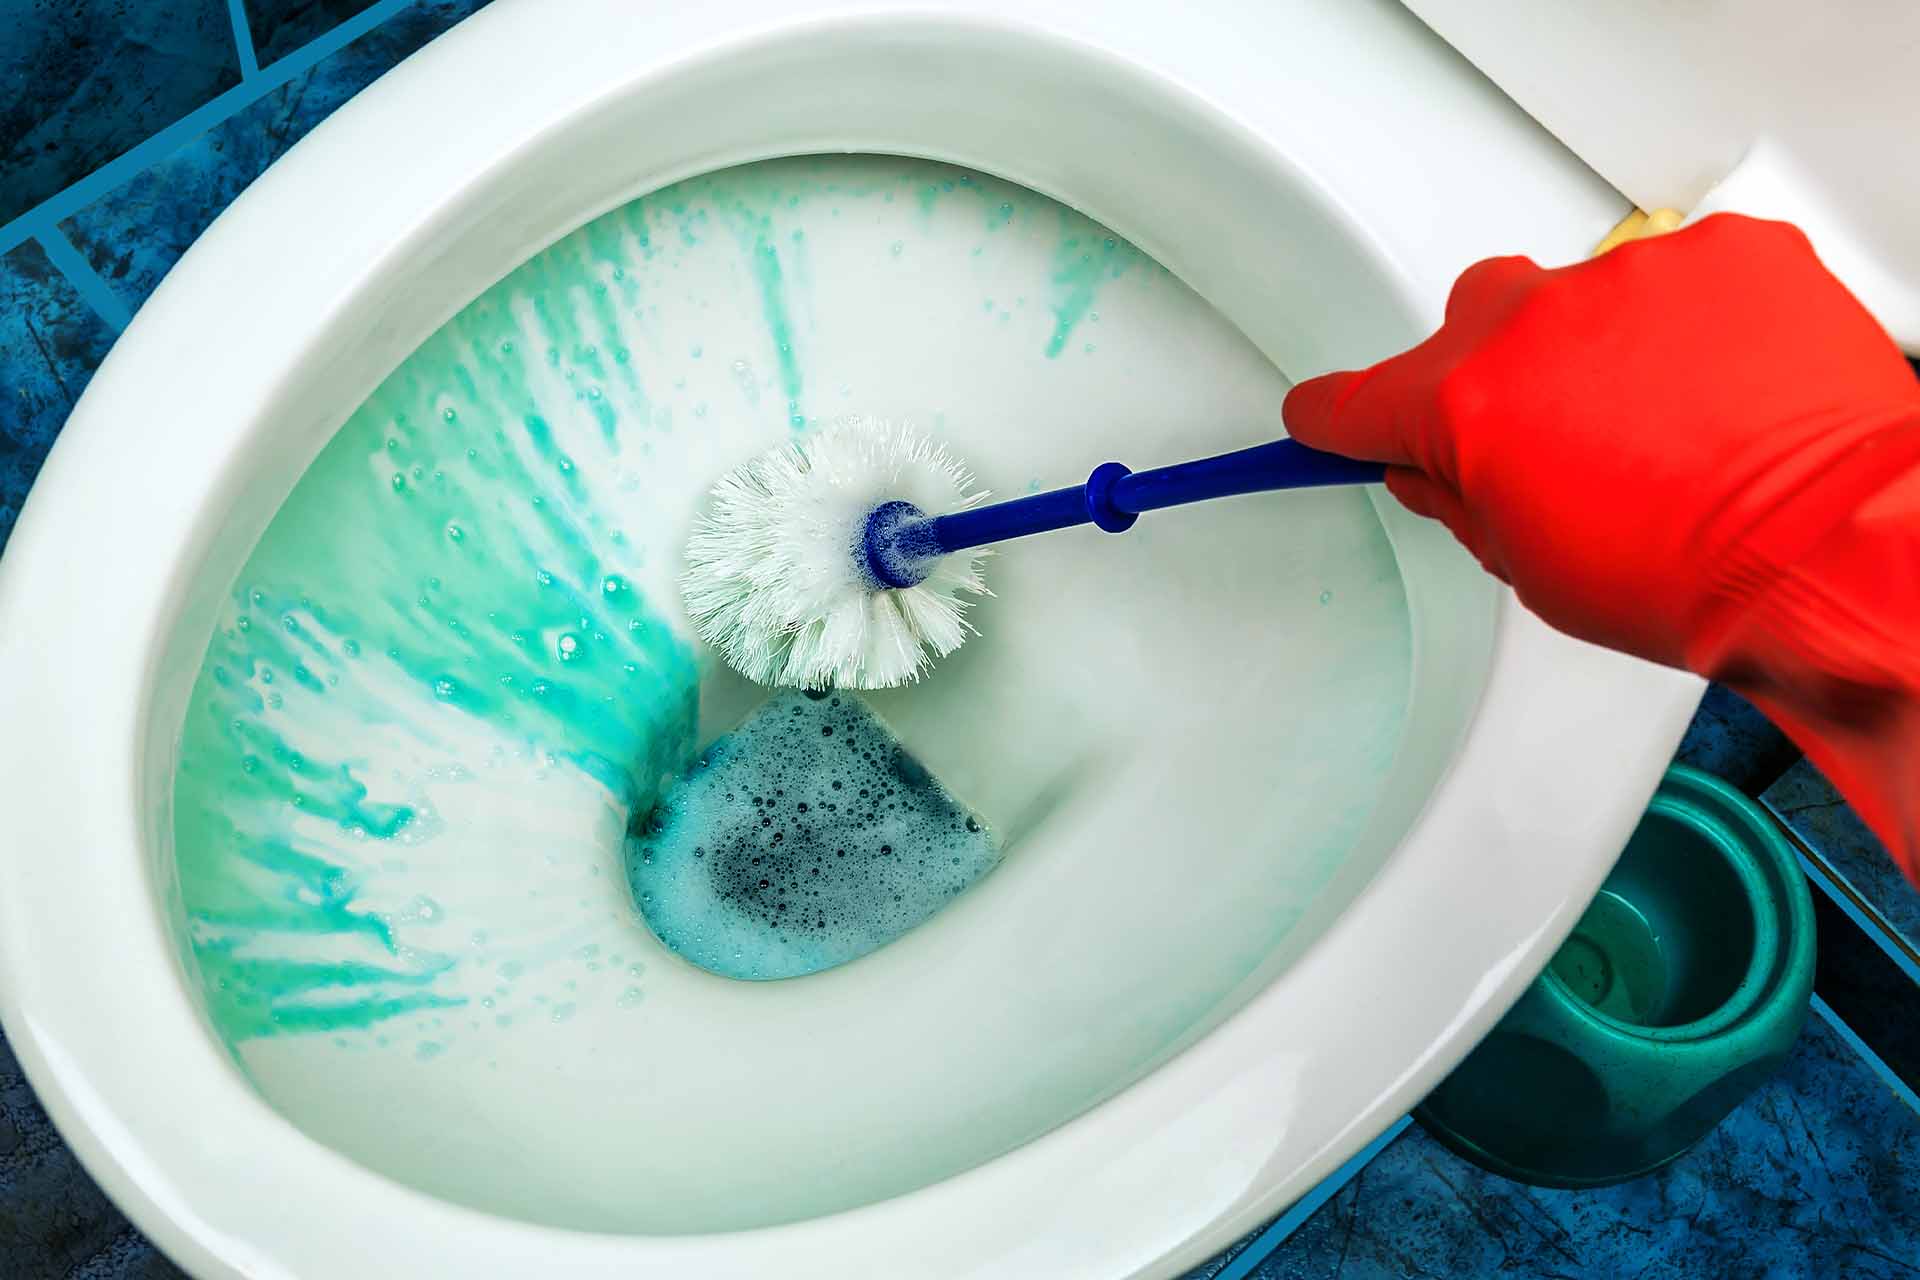 https://www.checkatrade.com/blog/wp-content/uploads/2021/12/how-to-clean-a-toilet.jpg